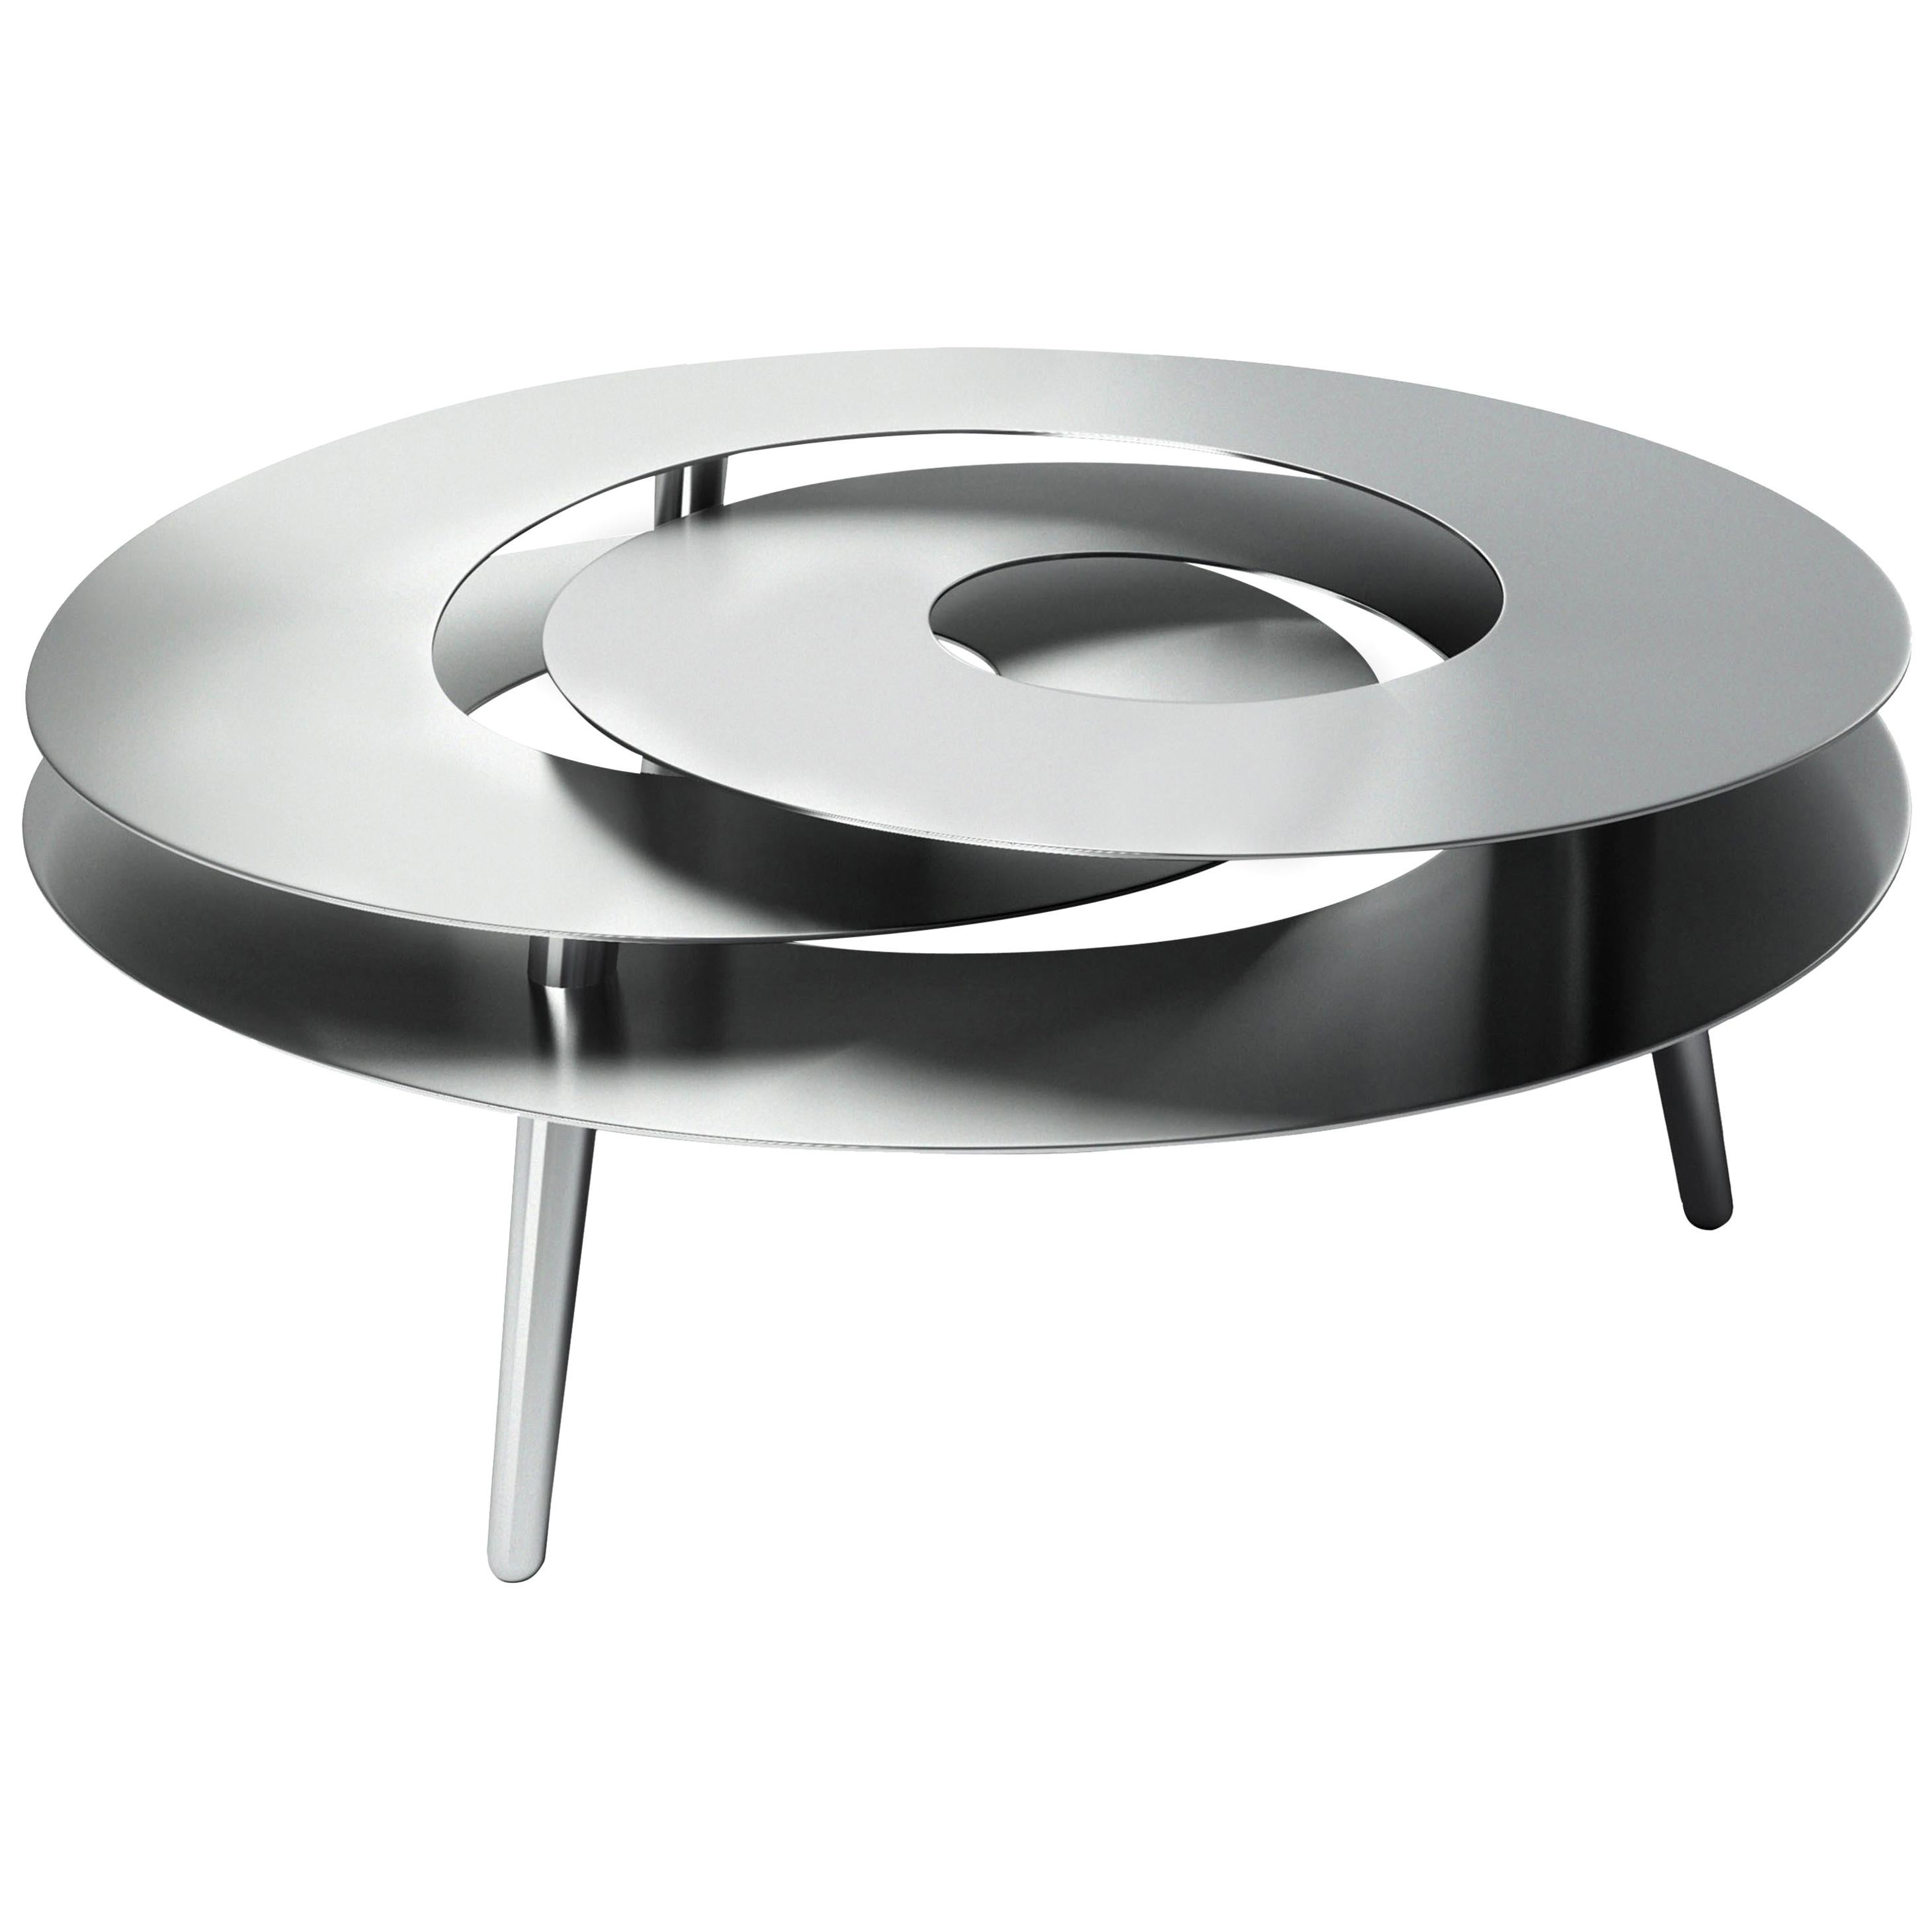 Rollercoaster Medium Coffee Table, Polished Stainless Steel For Sale